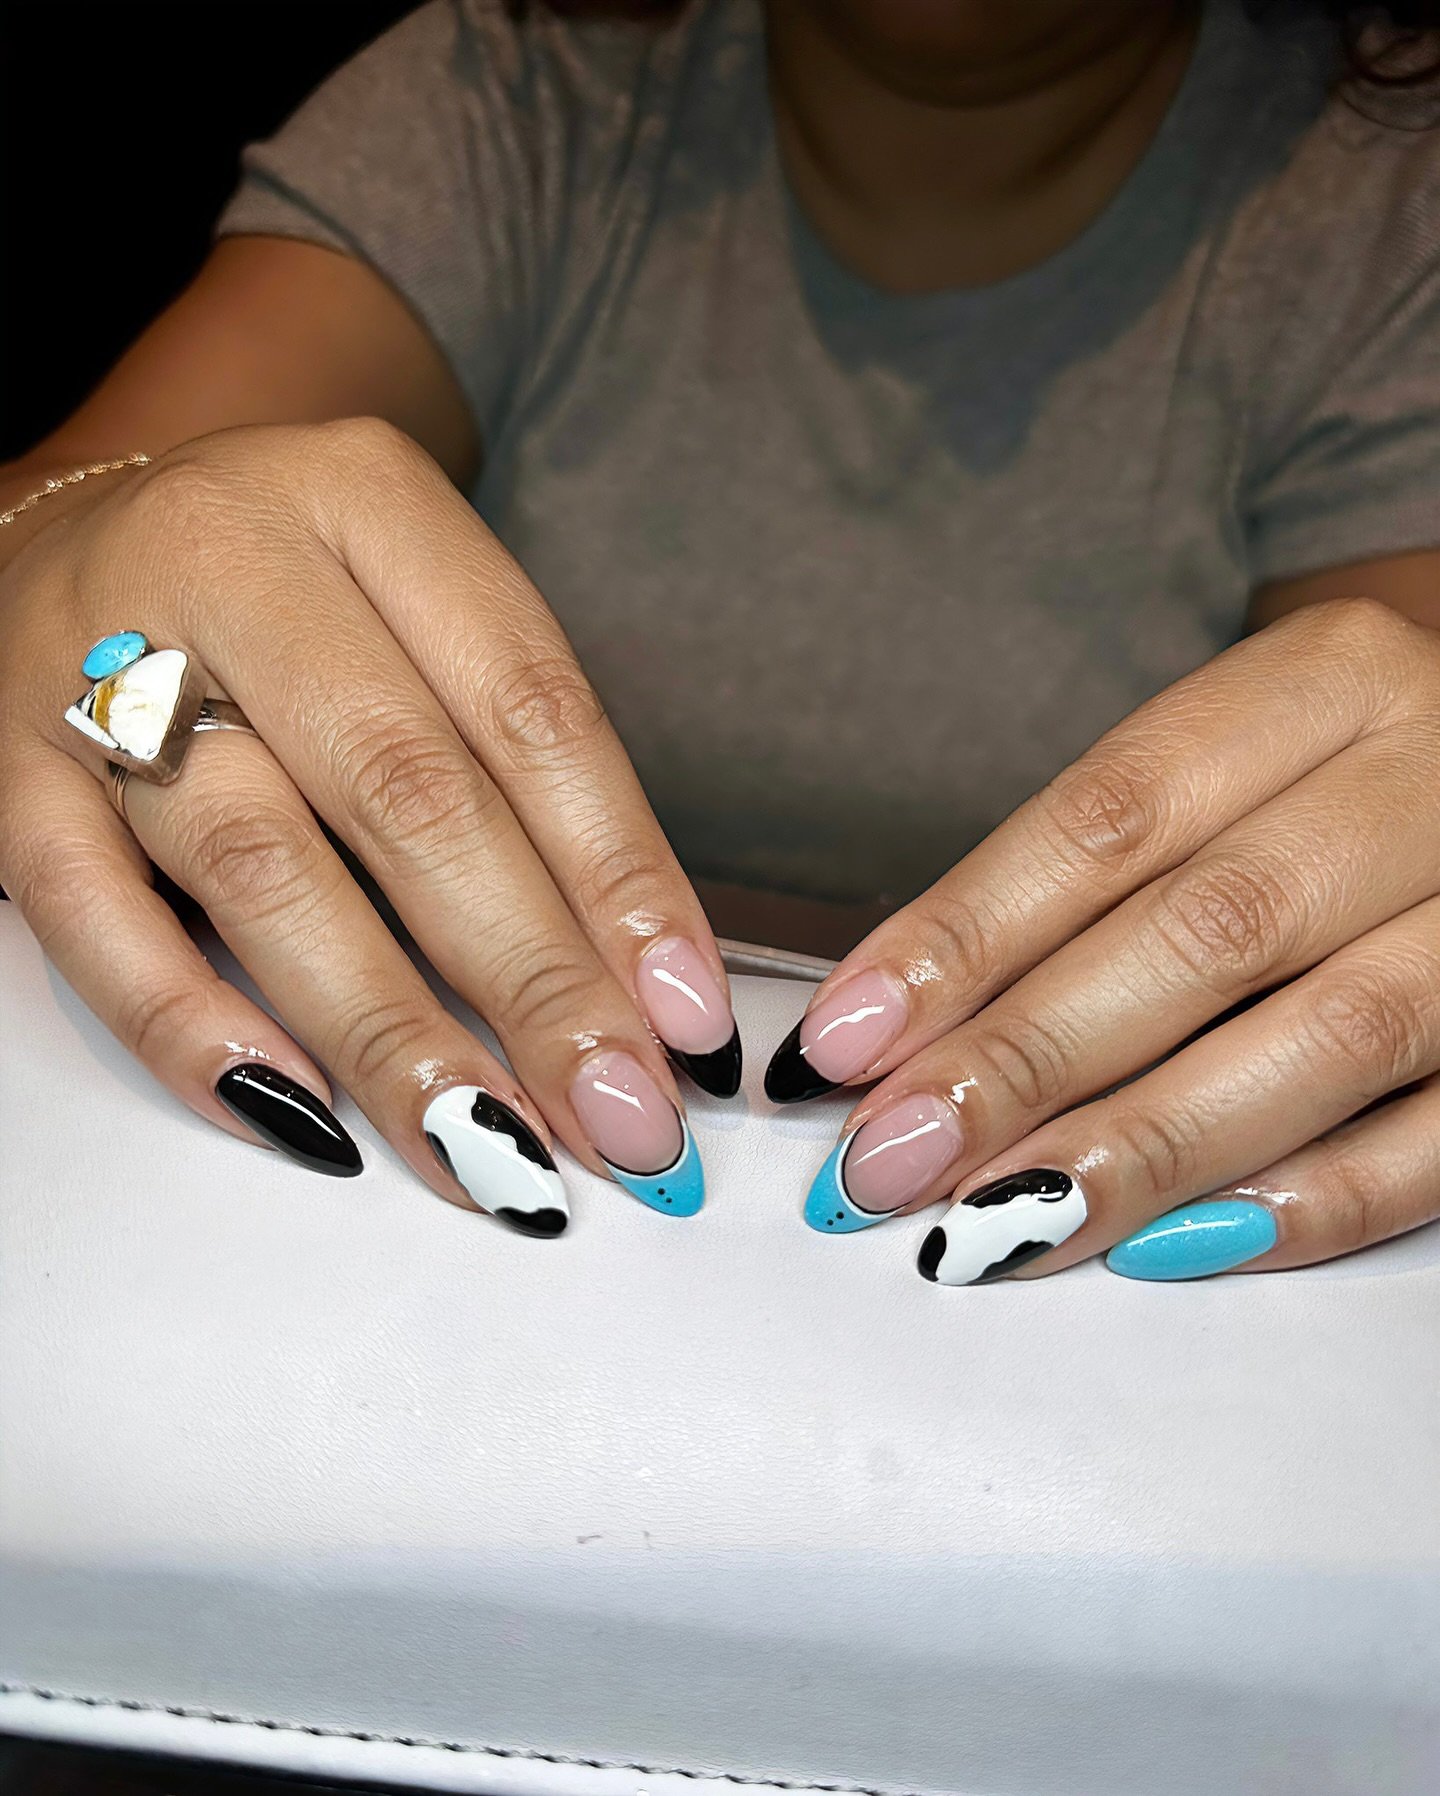 Udderly chic and utterly unique! 🐄💅 Ashley&rsquo;s multi-layer French tip with cow patterns is moo-ving the nail game to a whole new level. Dare to be different at Bliss Nails &amp; Spa. 

#NailArt #CowPrintChic #FrenchTipFun #blissandspa #stationl